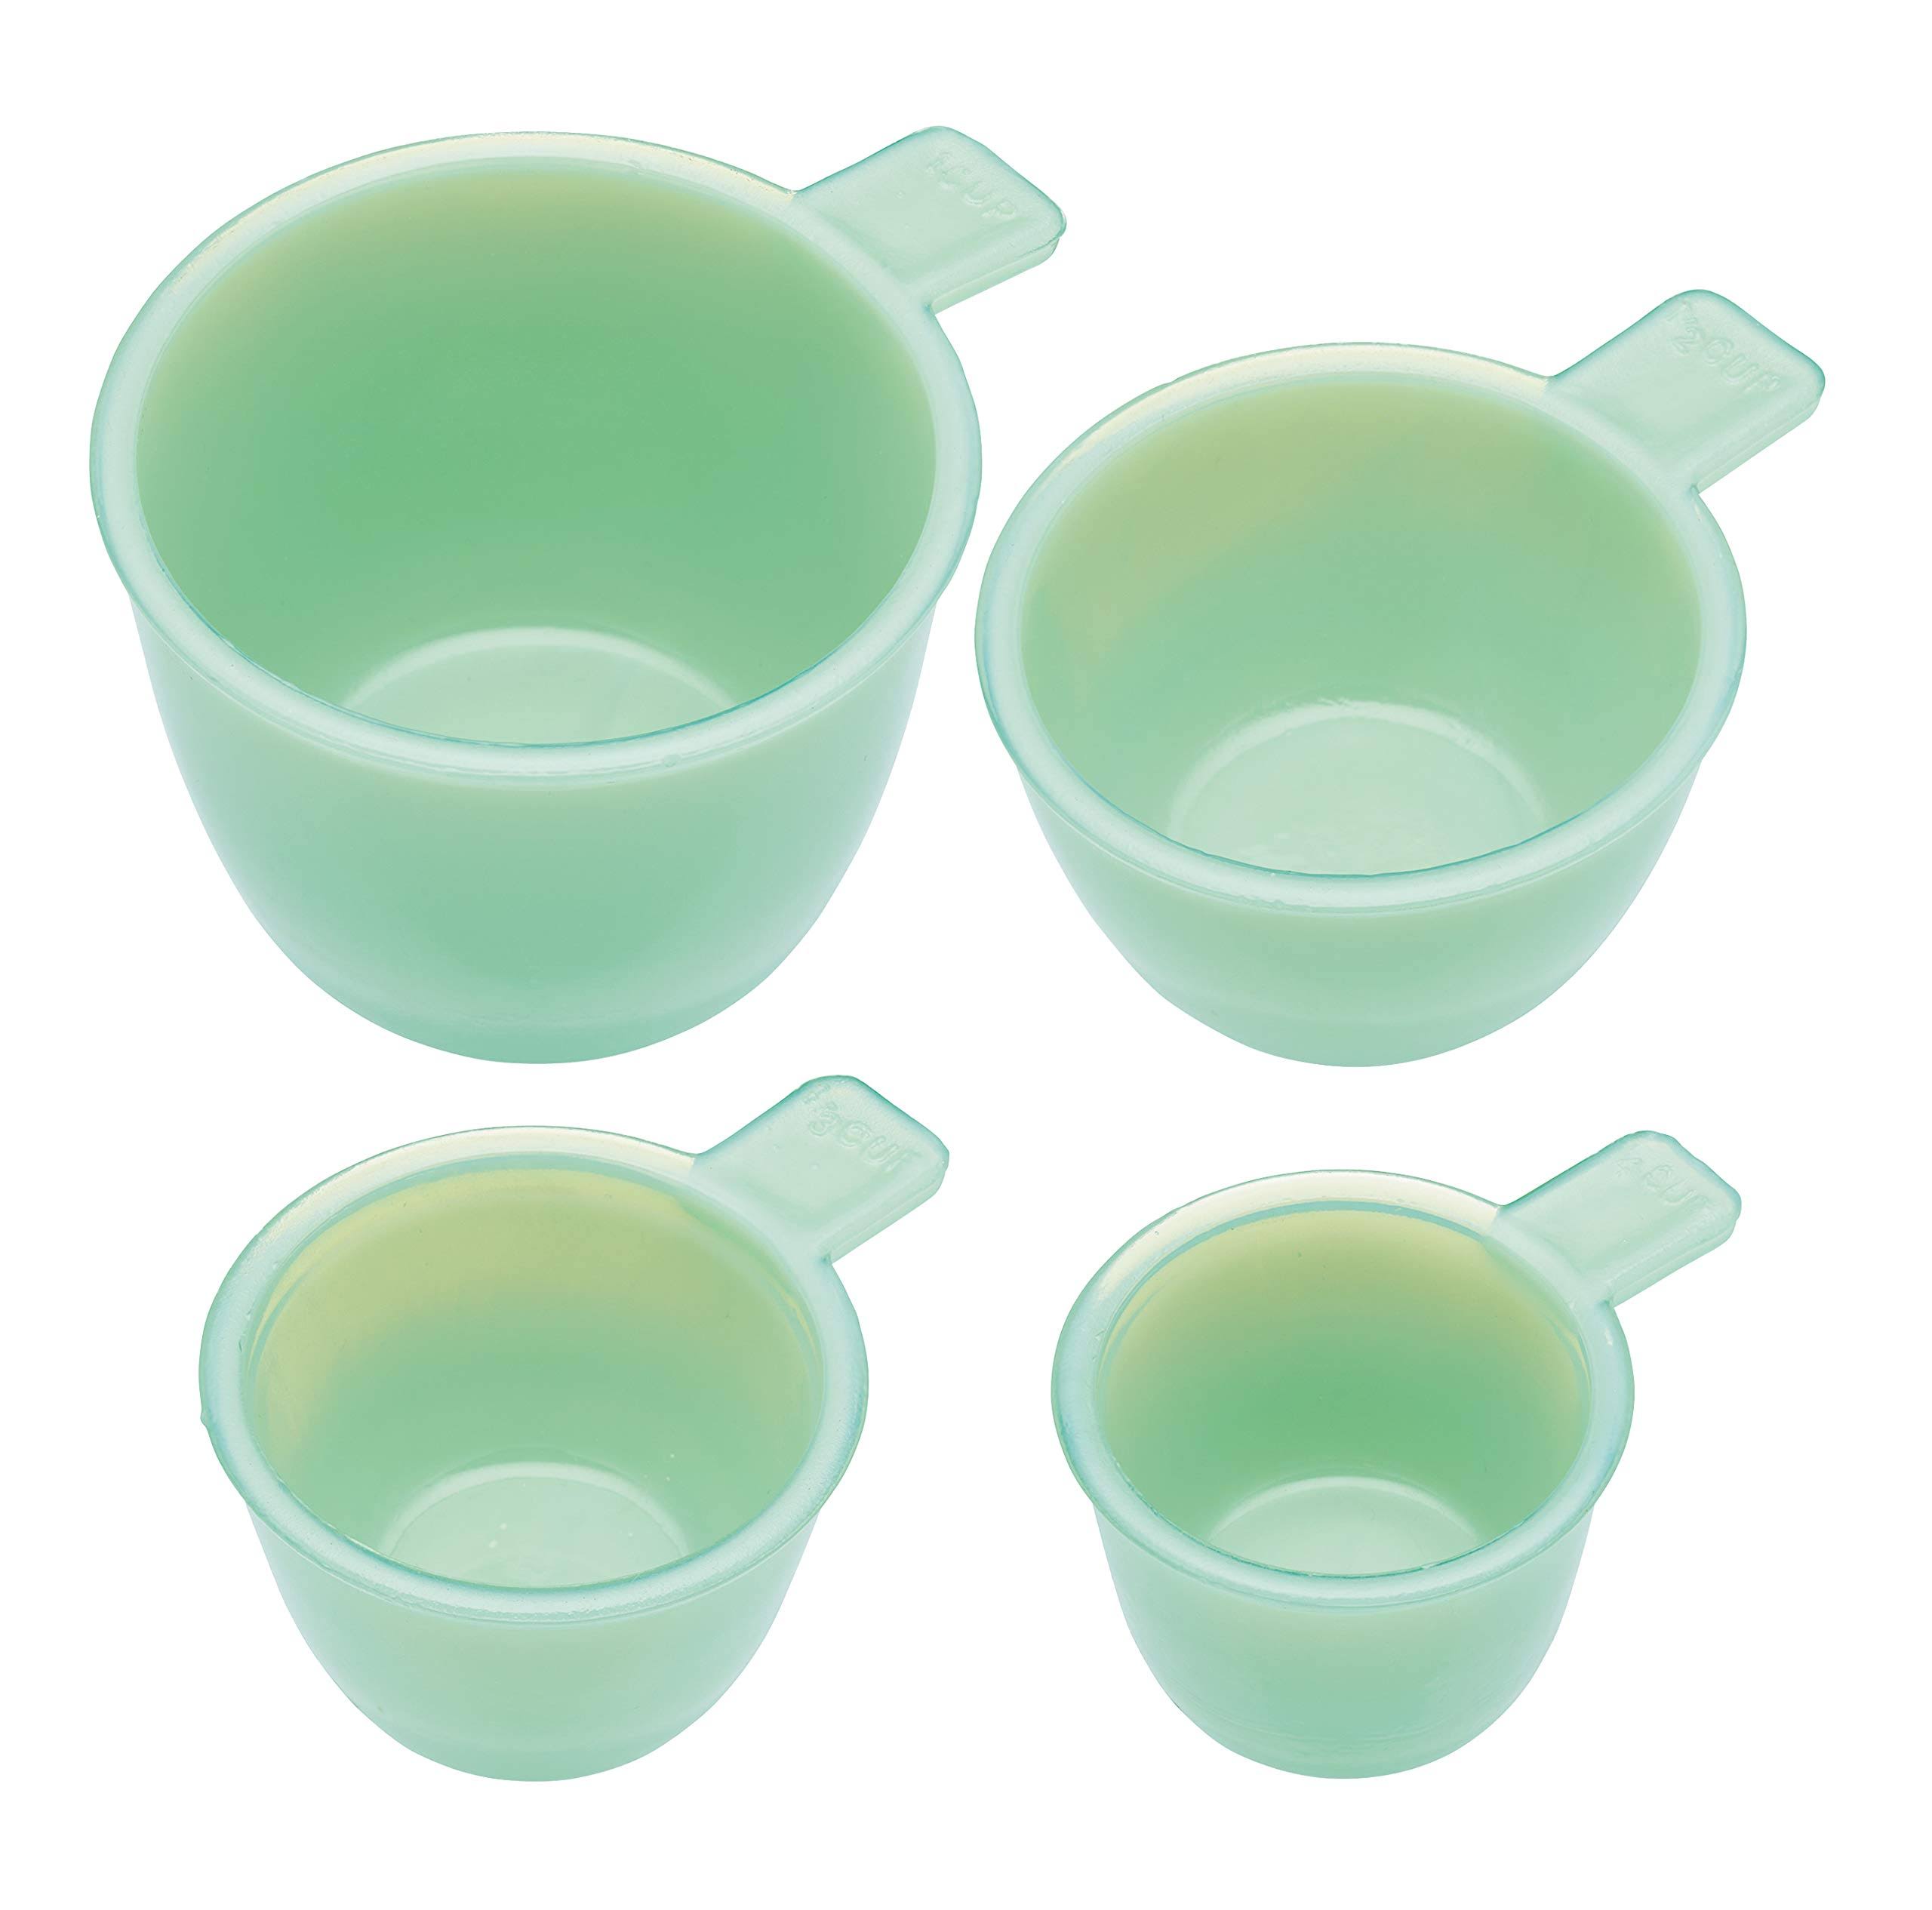 KitchenCraft Milk Glass Measuring Cup Set in Gift Box